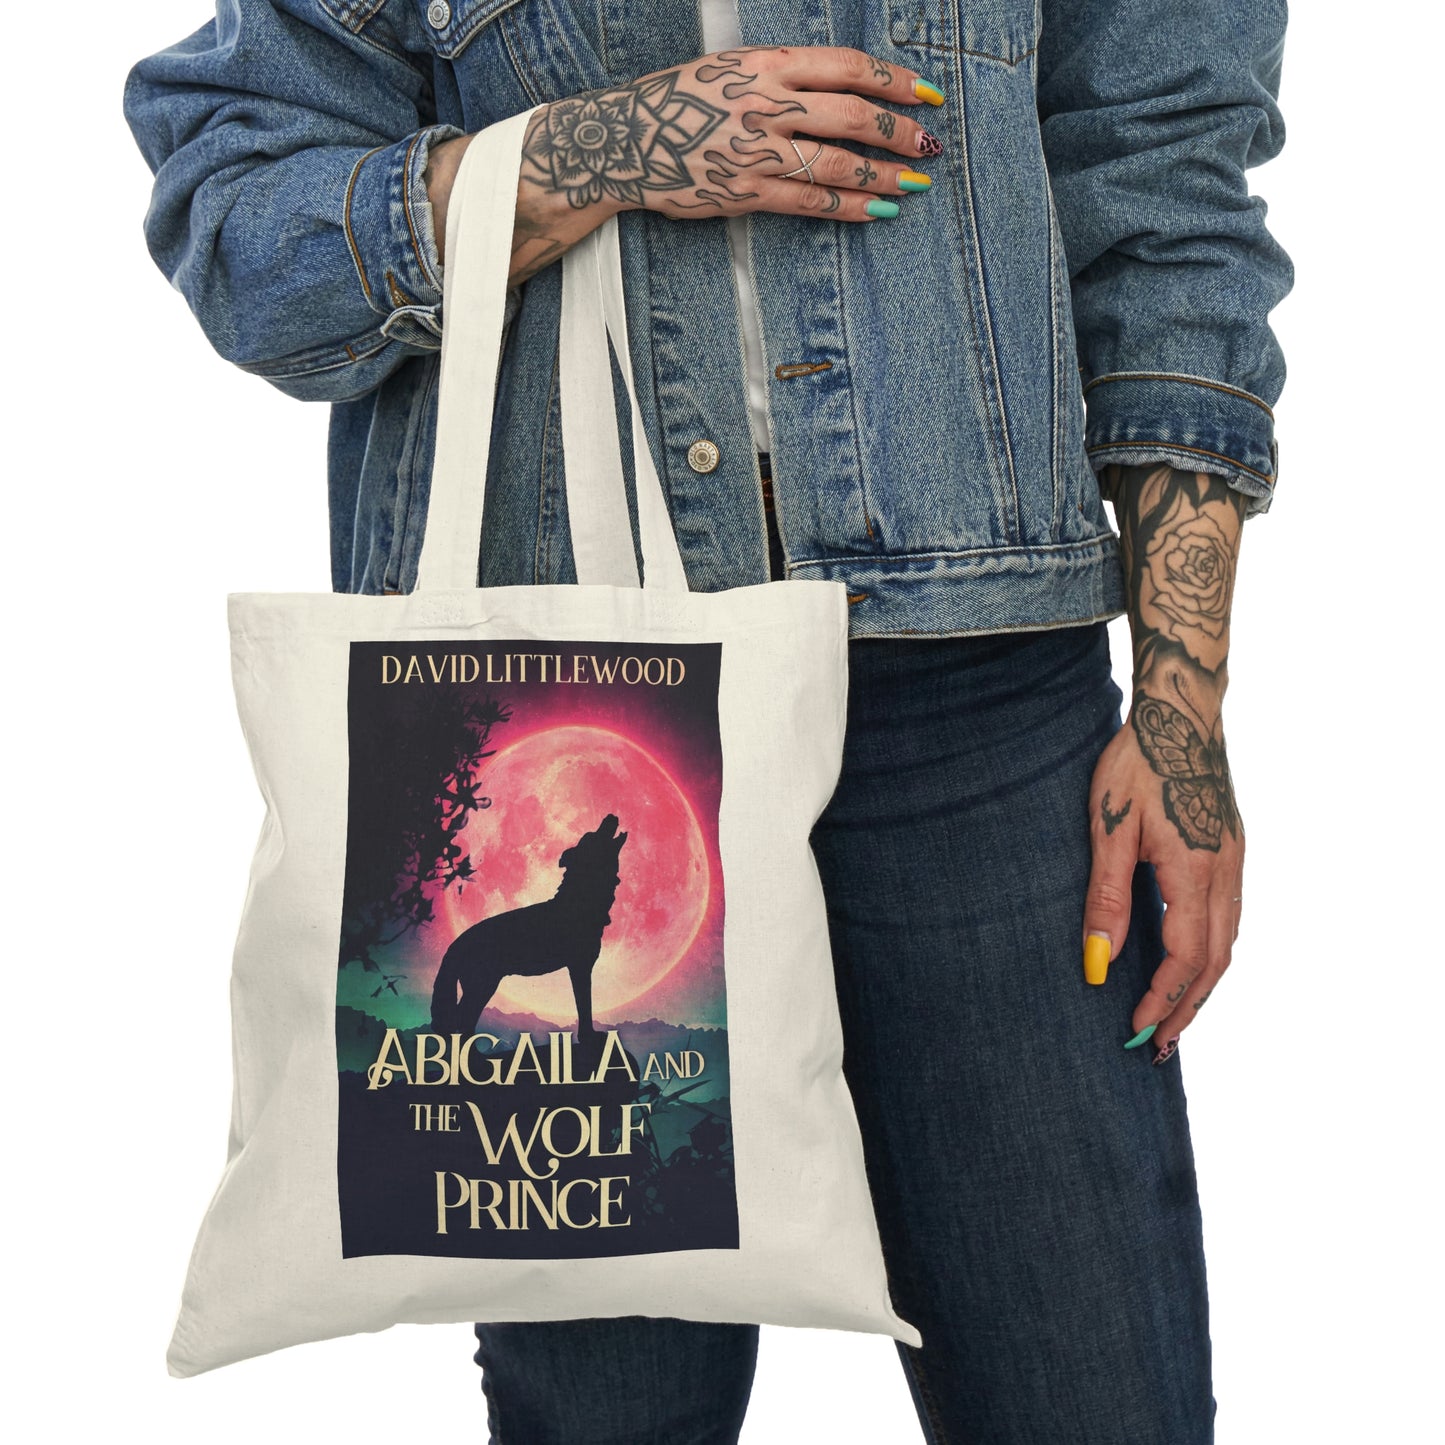 Abigaila And The Wolf Prince - Natural Tote Bag